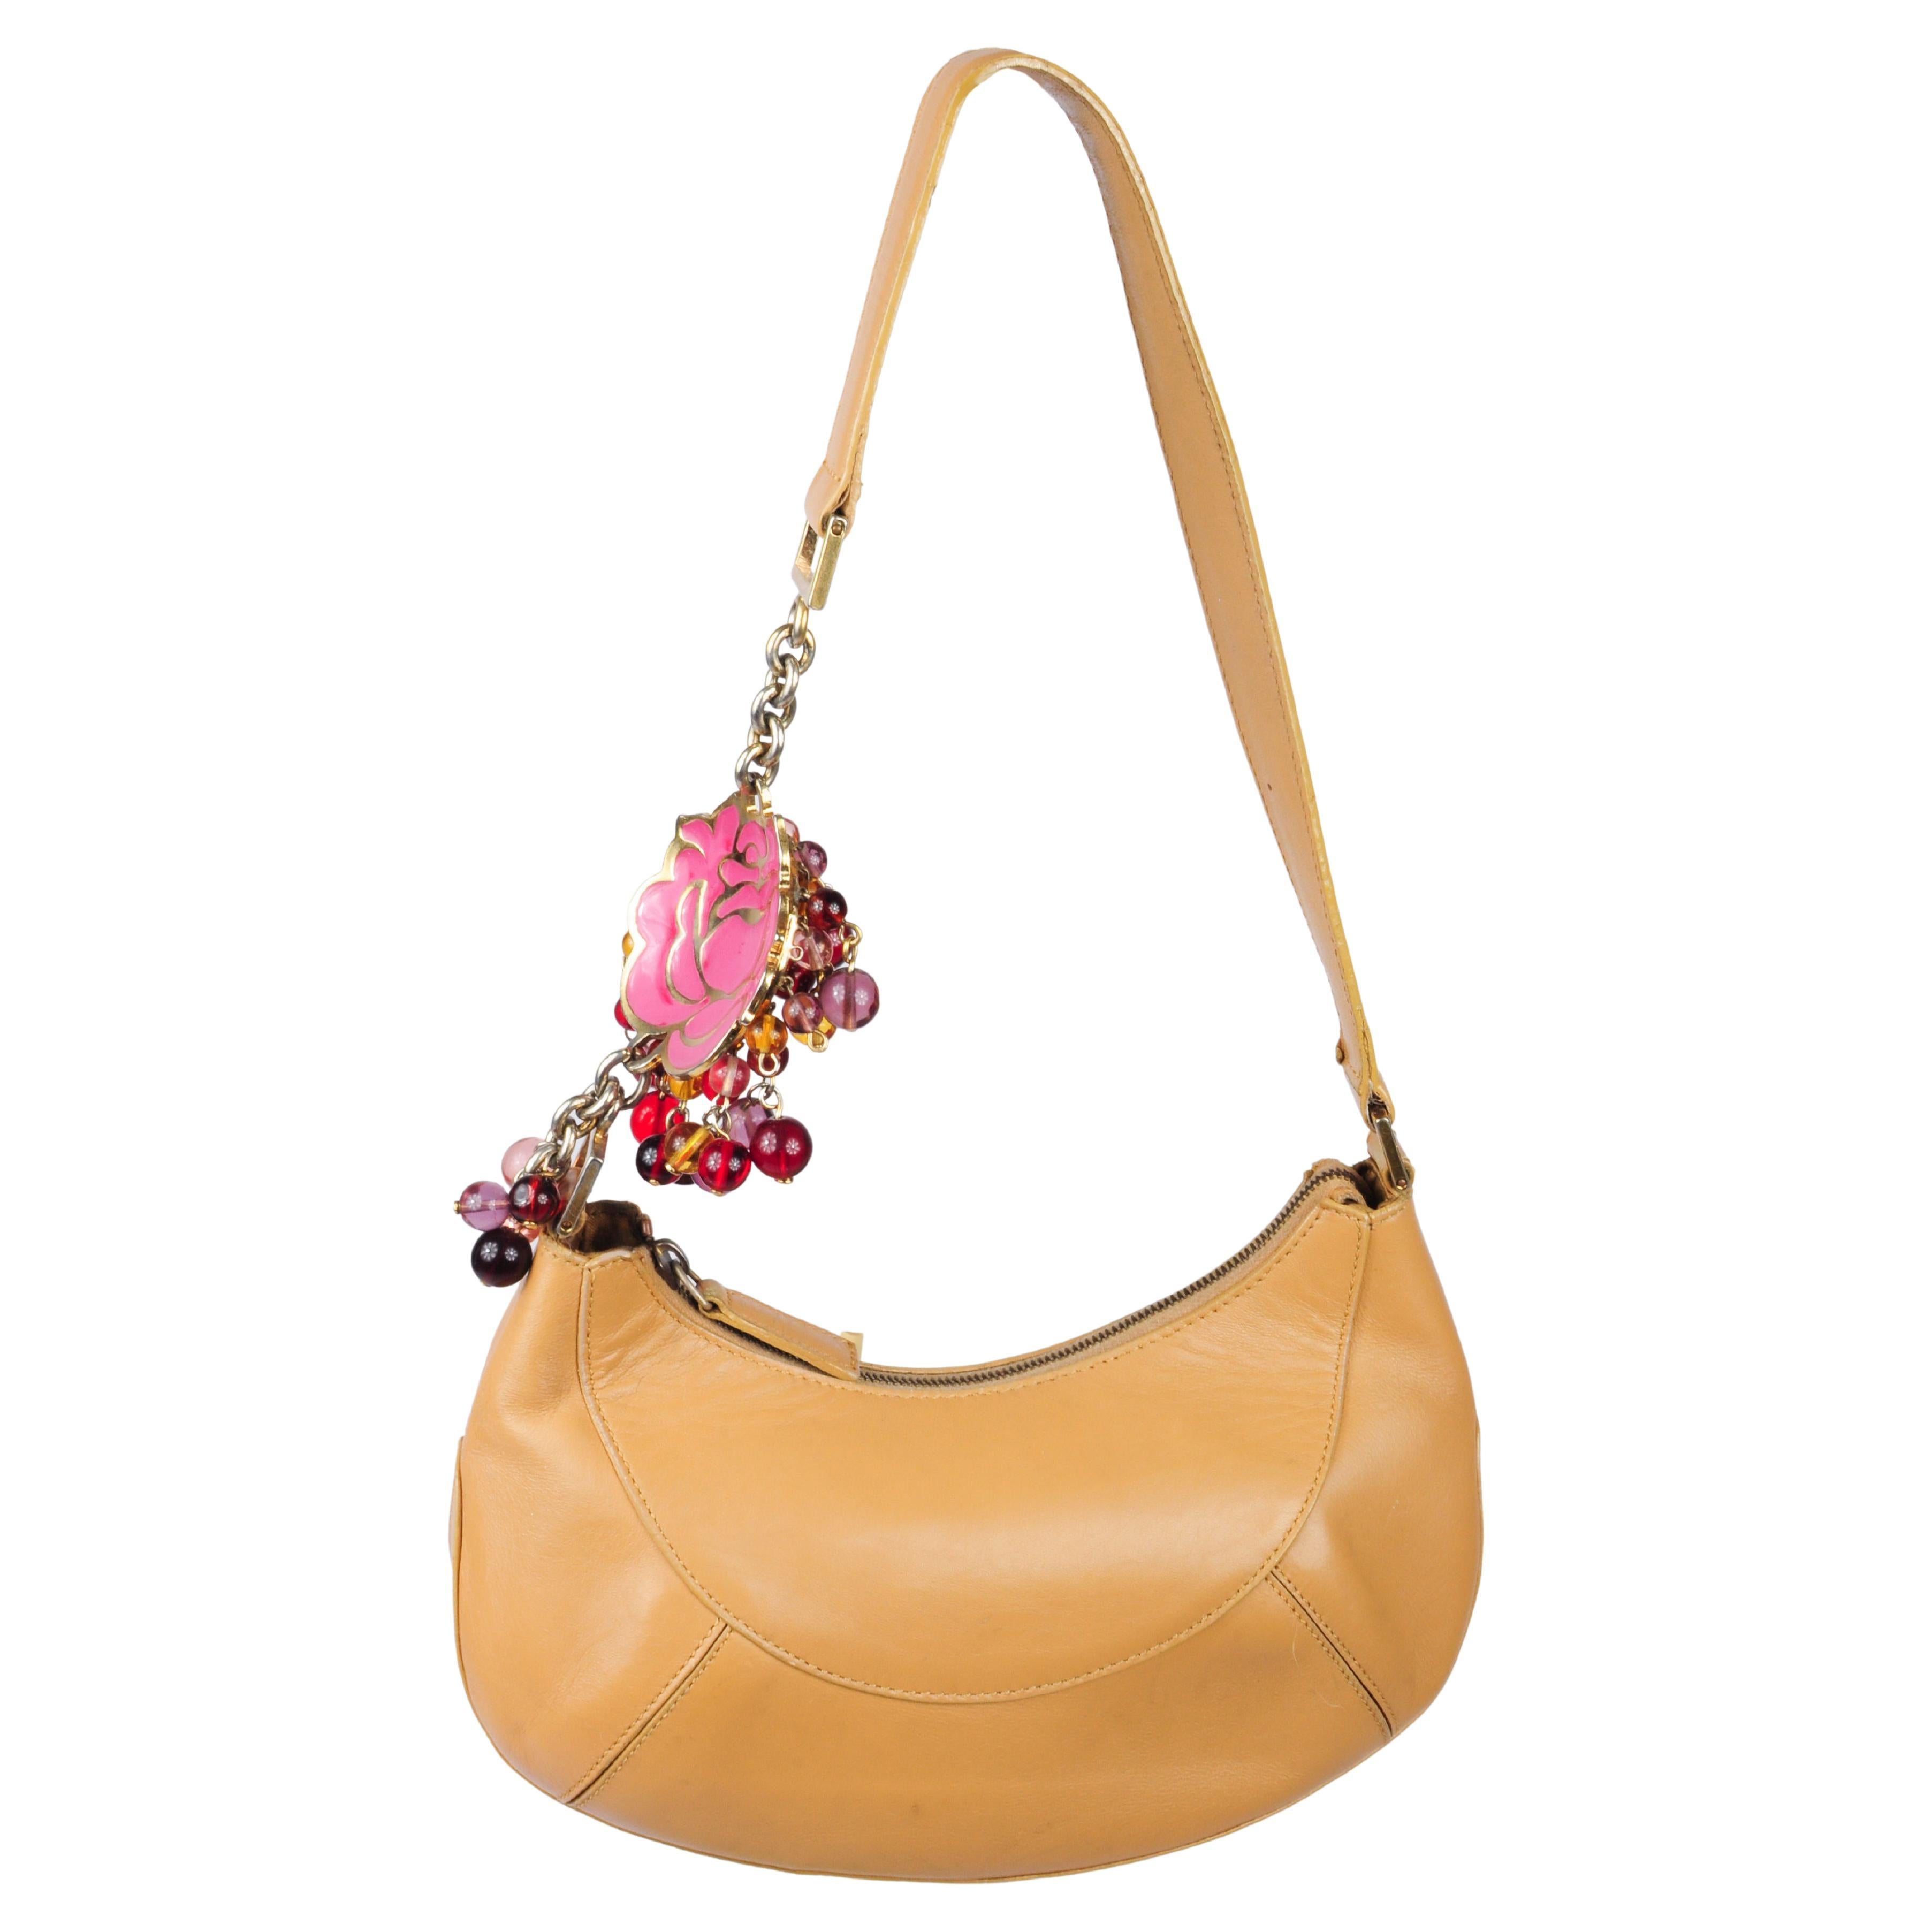 Gianni Versace Mini Shoulder Bag with Camellia Flower Glass Beads Details 2000s For Sale